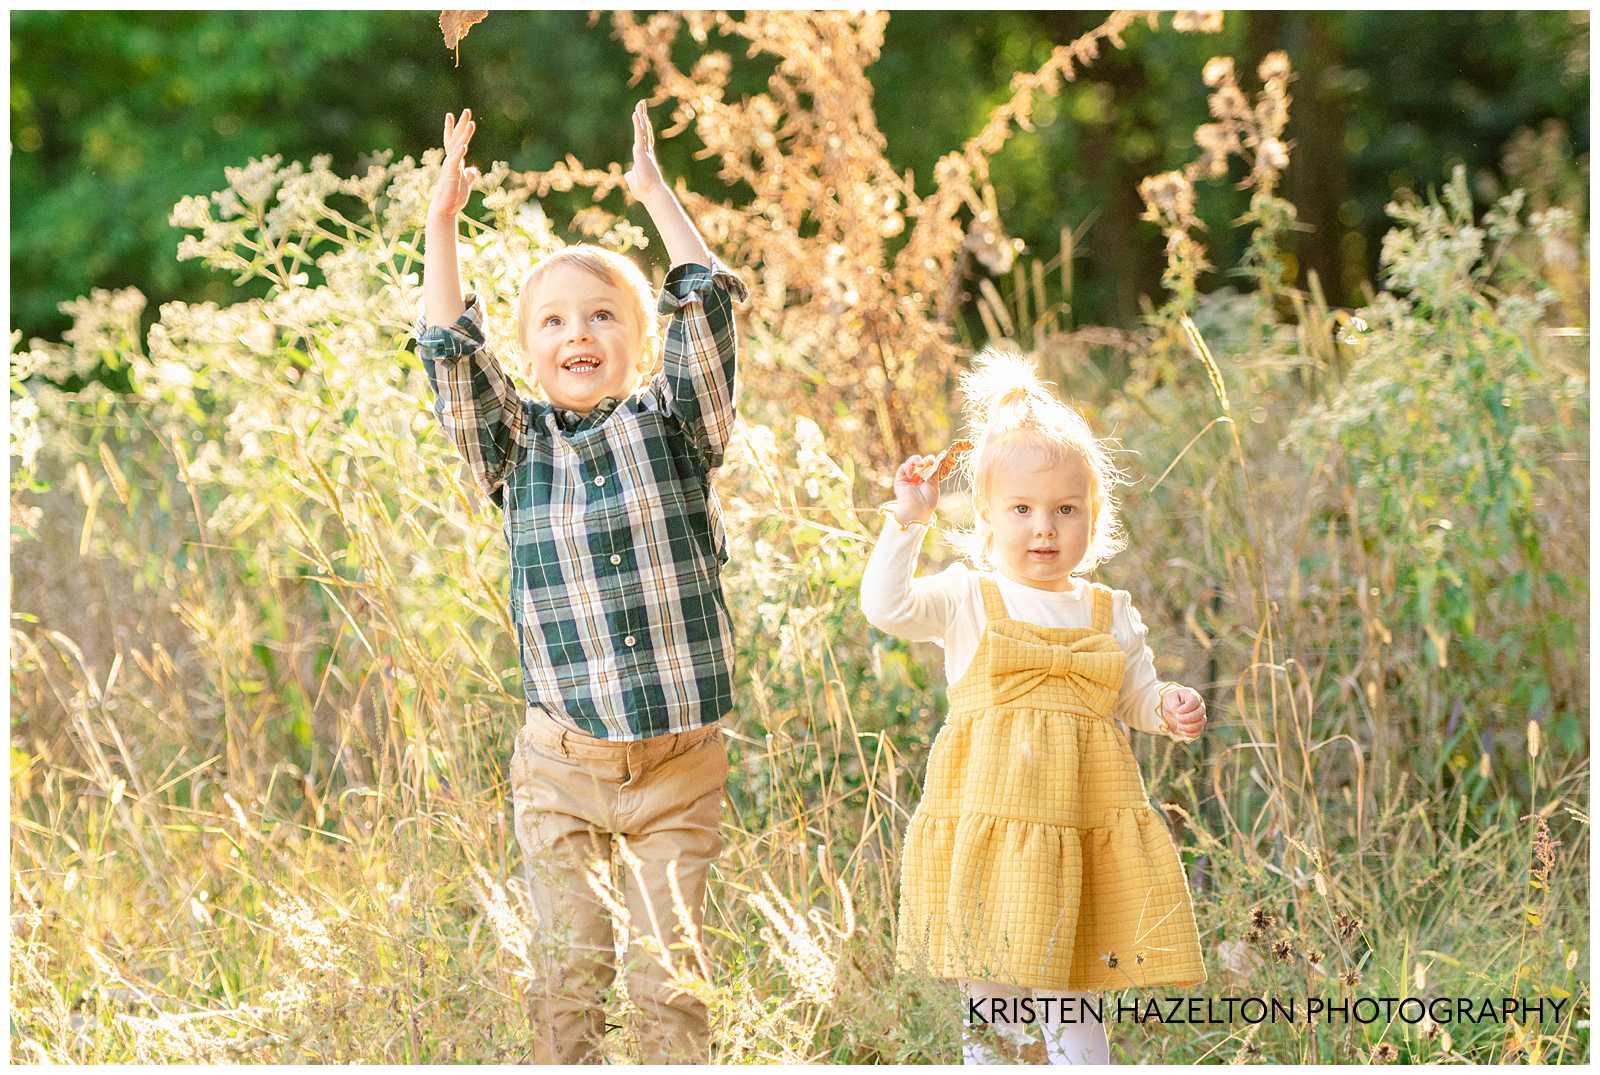 Toddler brother and sister throwing leaves in a field of yellow grass and wildflowers